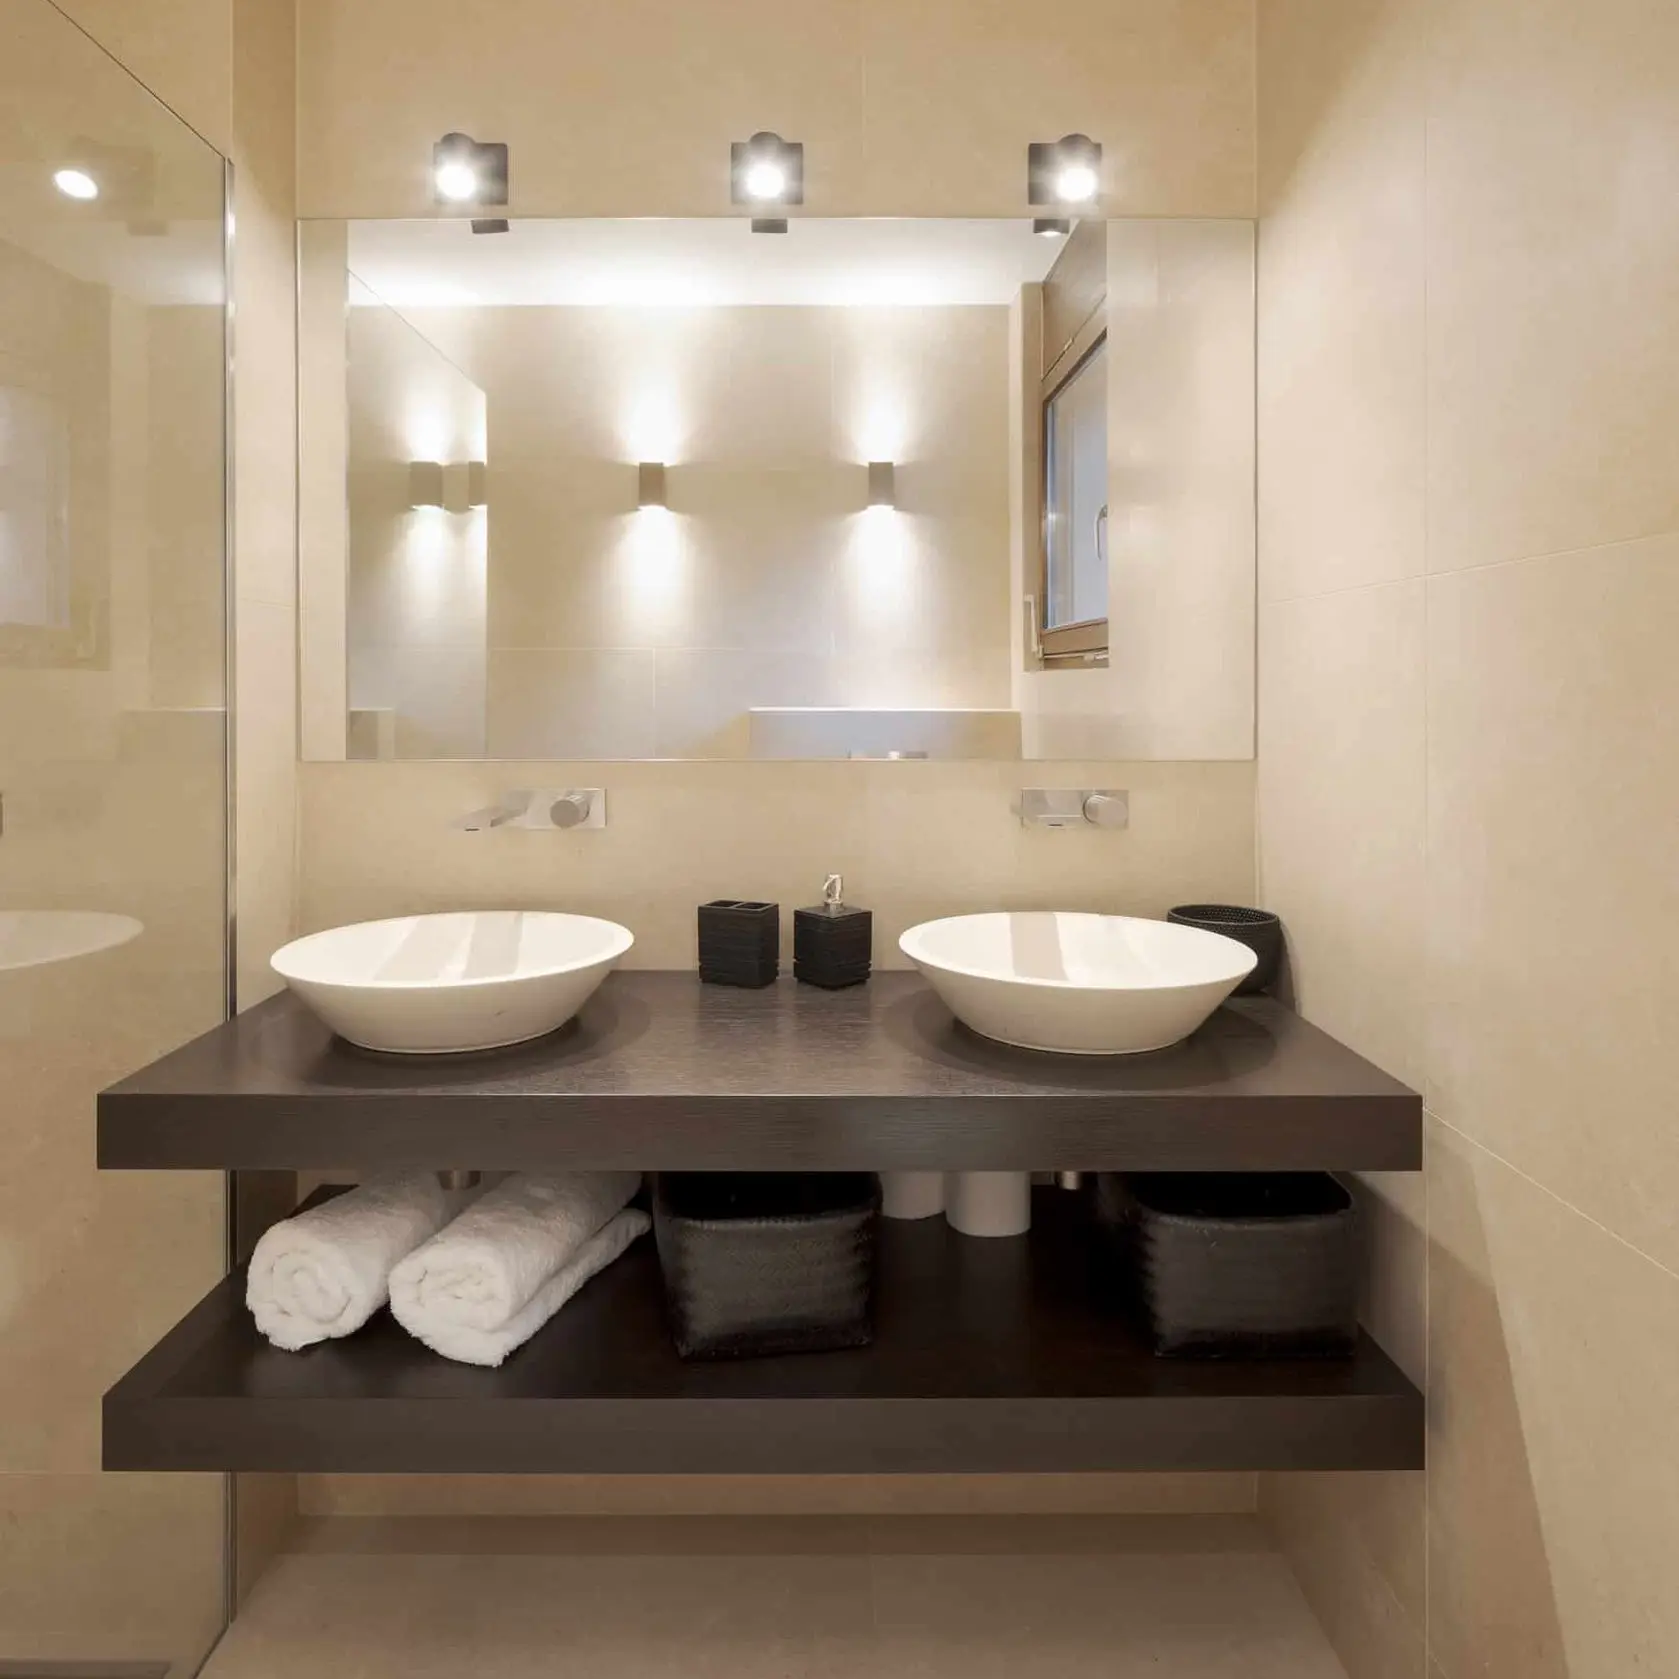 A modern bathroom with two sinks and a large mirror, providing convenience and functionality for multiple users.